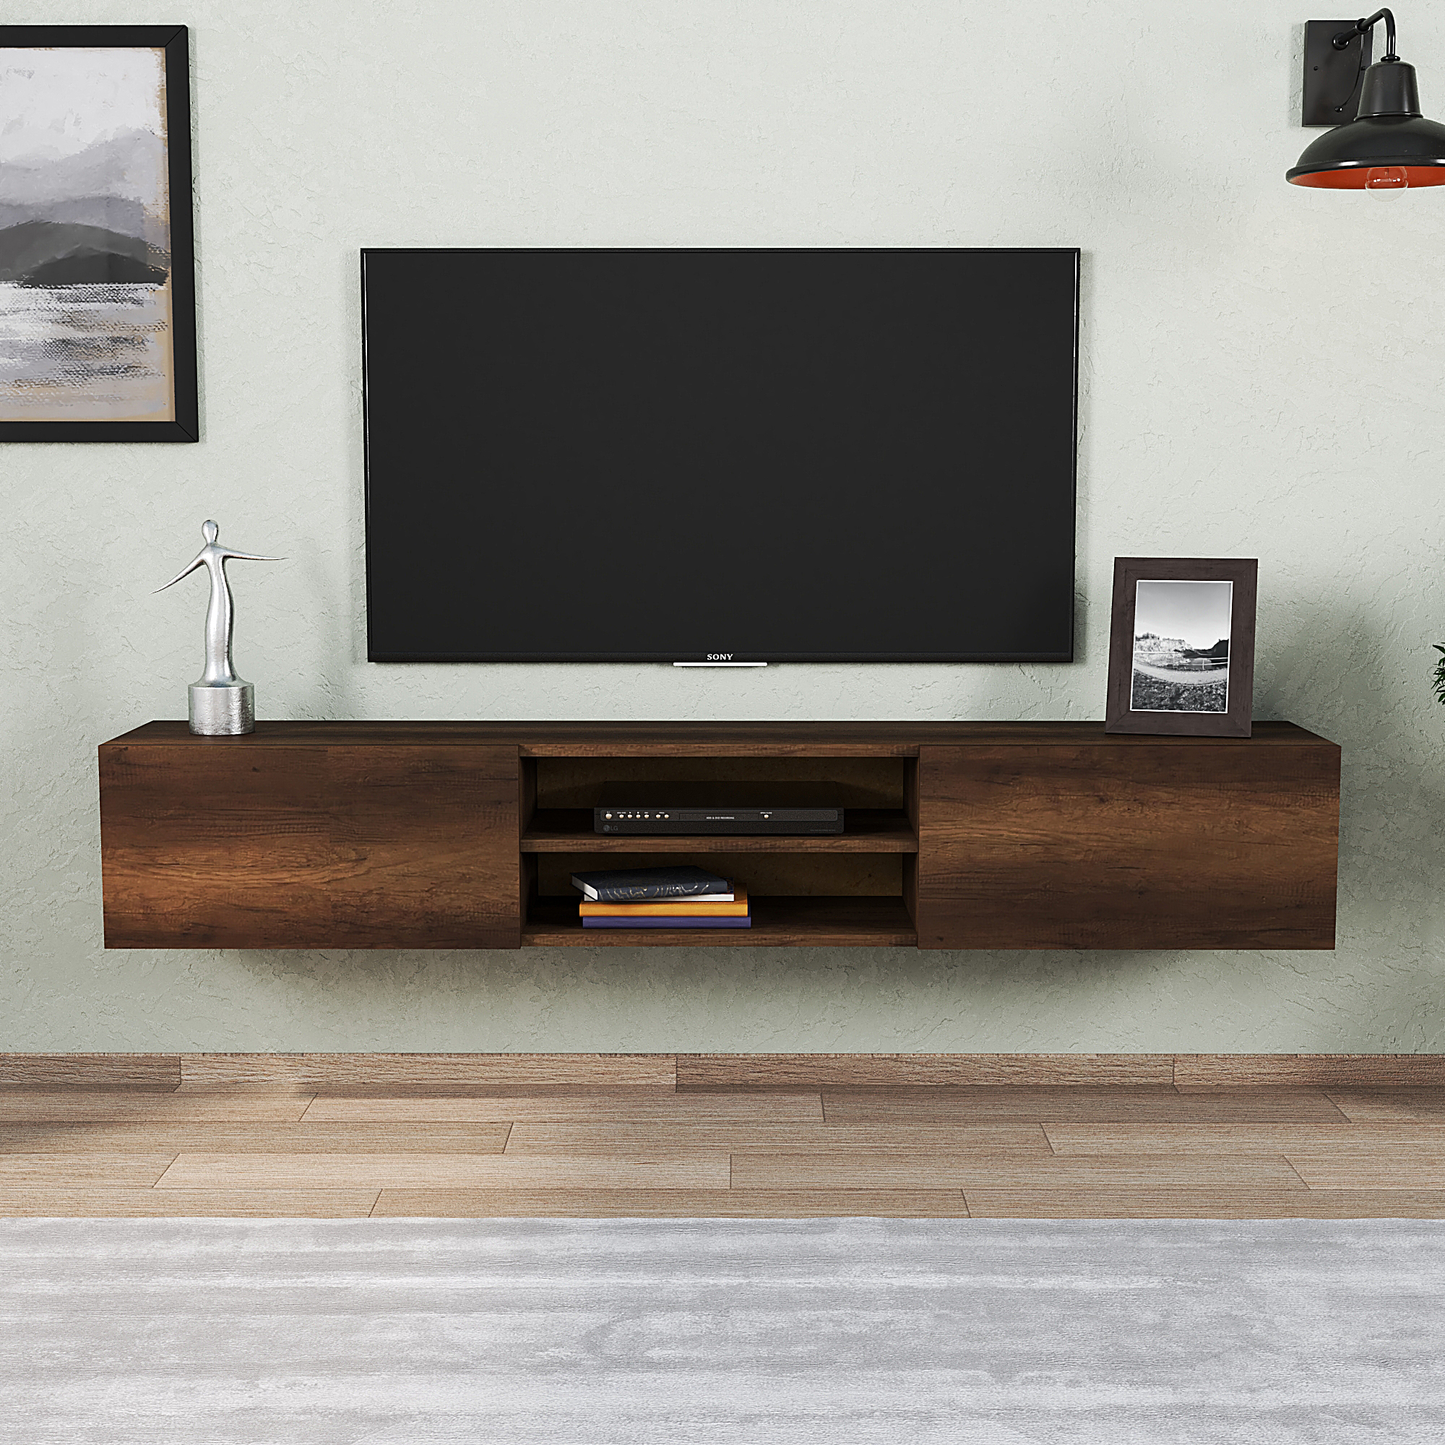 Otranto Floating TV Stand & Media Console for TVs up to 80" - Walnut Color